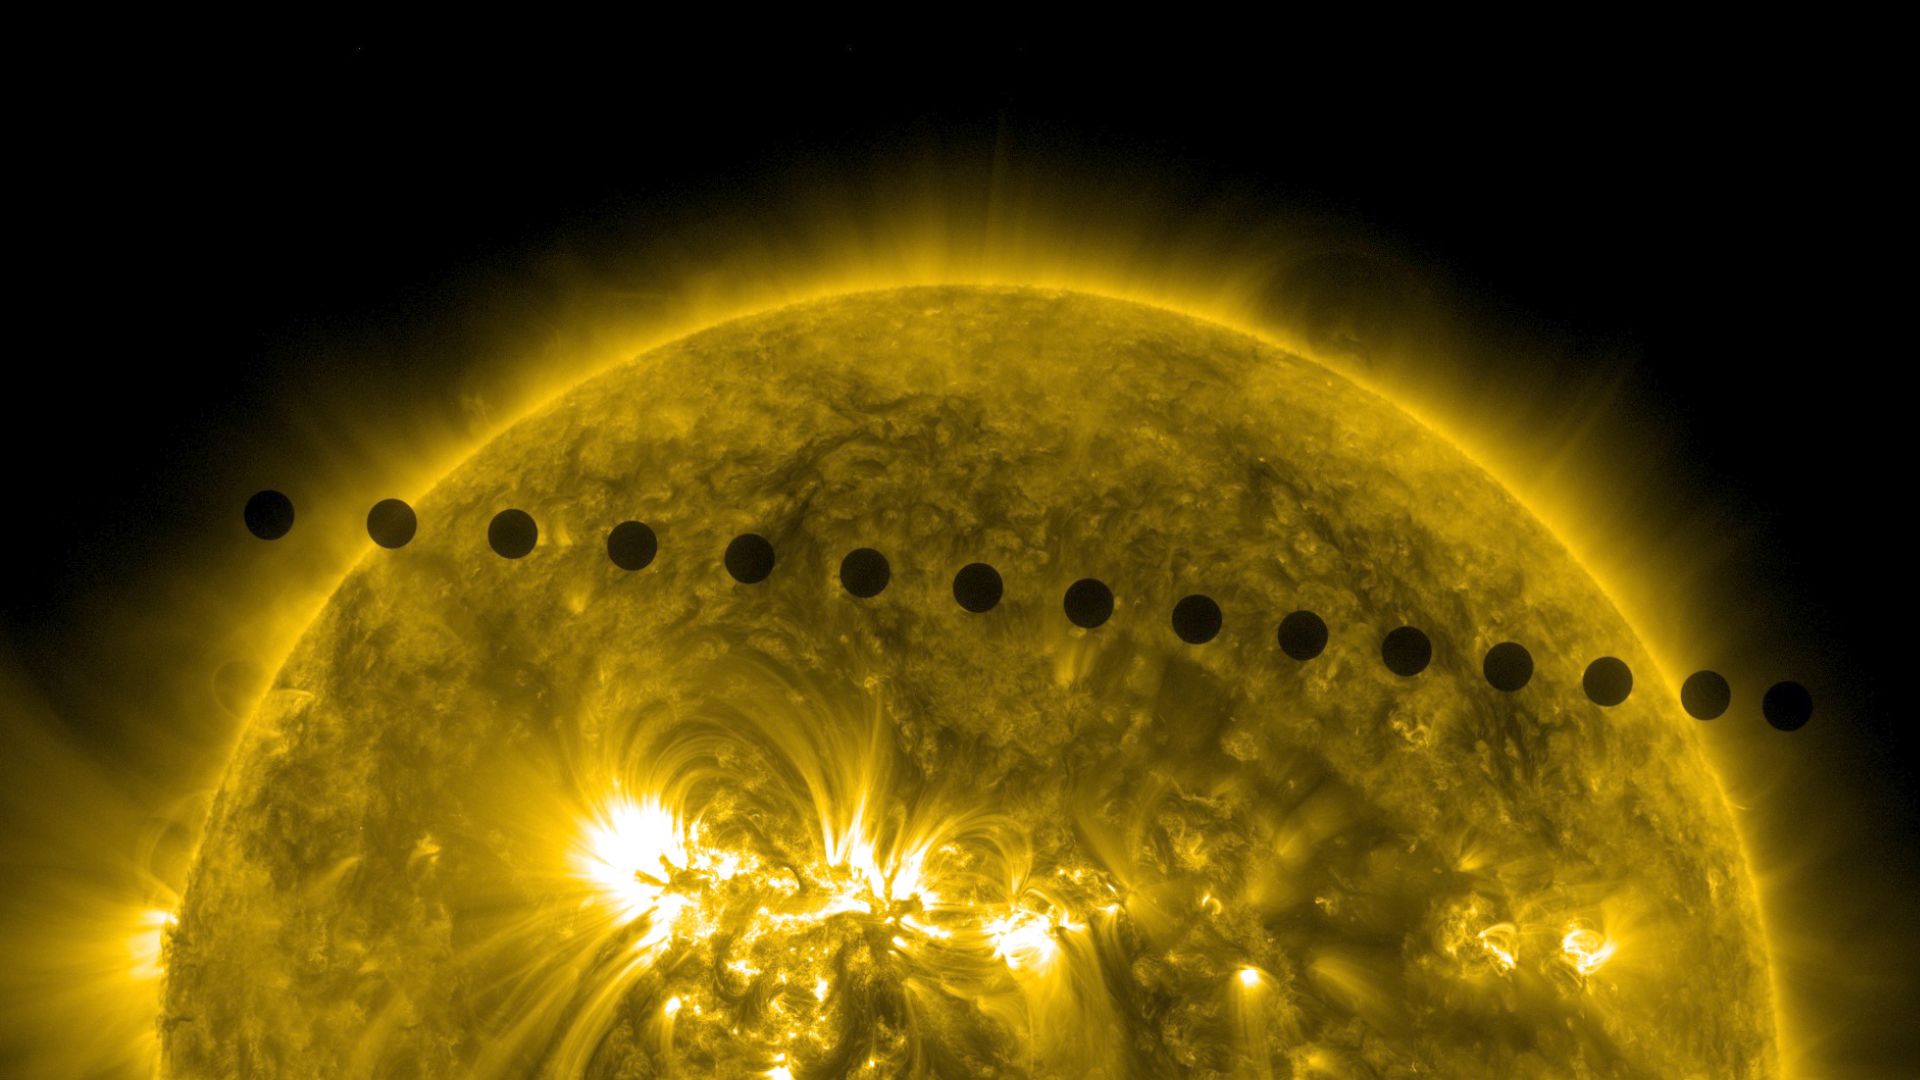 Sequence of images from Solar Dynamic Observatory (SDO) in 171 wavelength of the Venus transit, merged together to show path of Venus across the Sun.